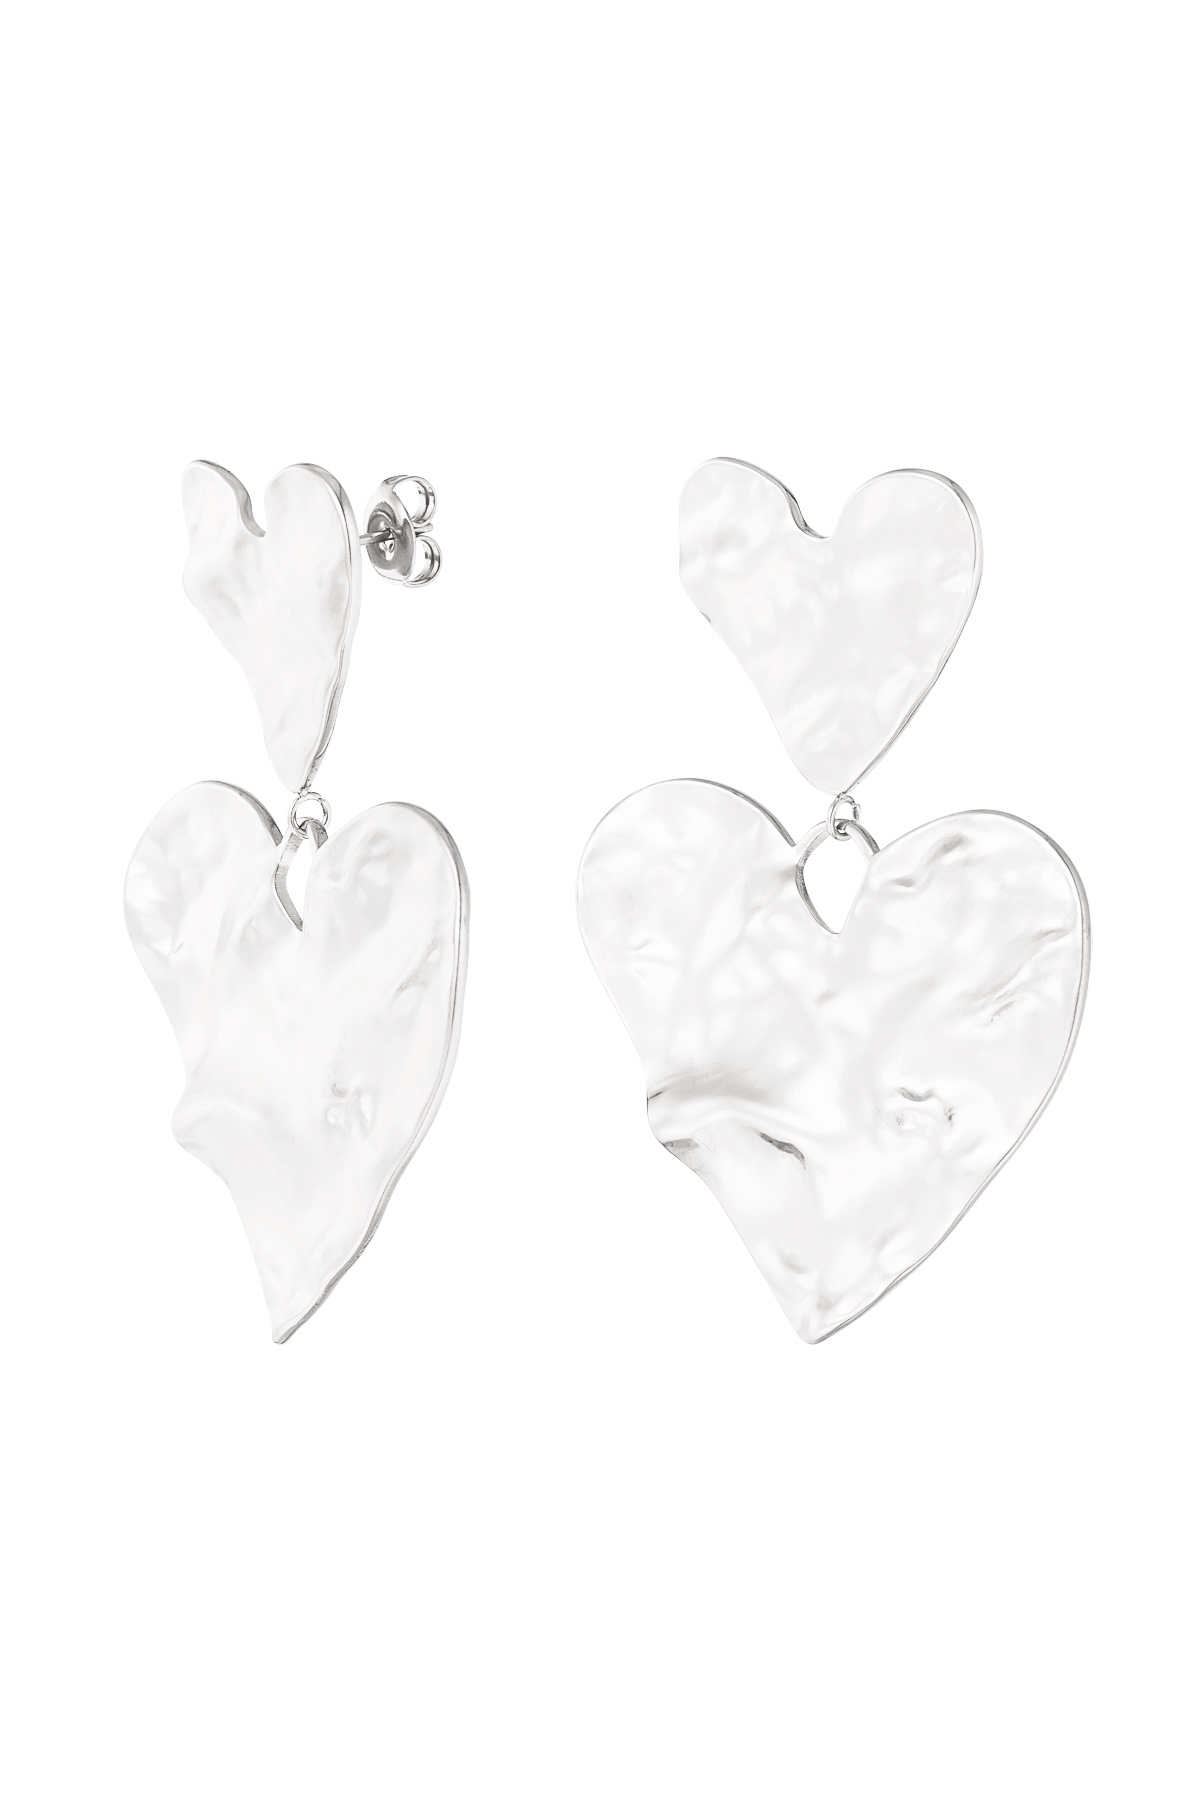 Earrings extra love - silver h5 